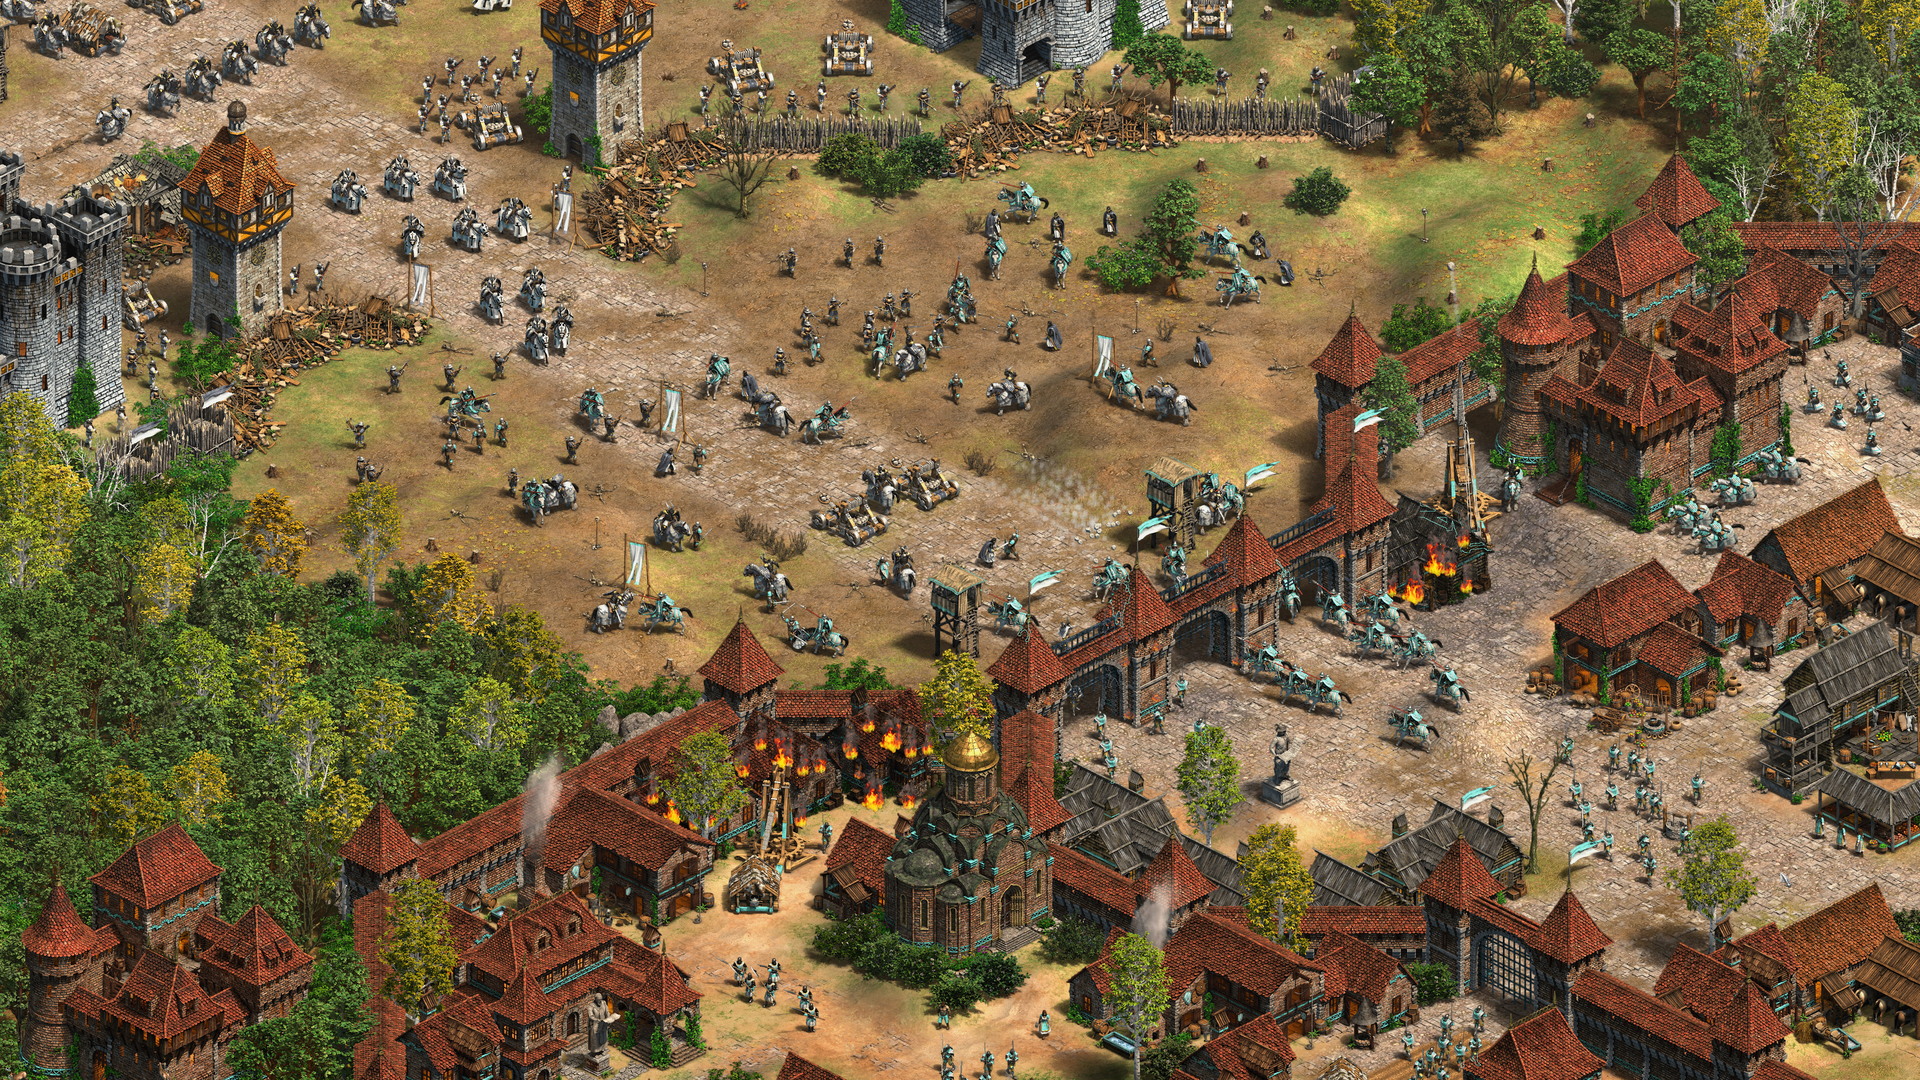 Age of Empires II: Definitive Edition - Dawn of the Dukes - screenshot 3